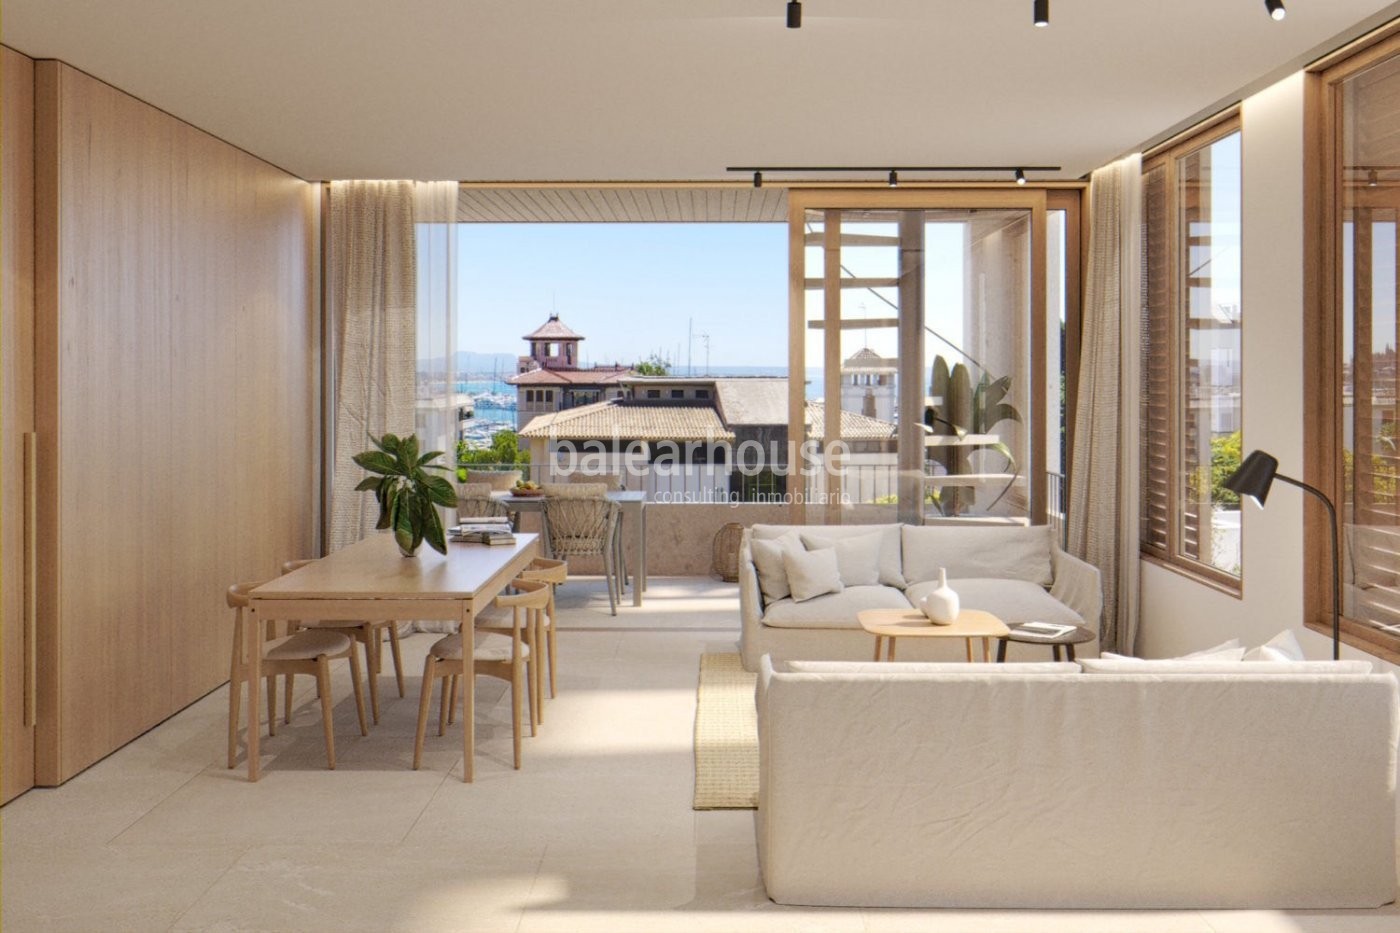 Excellent penthouse with swimming pool and private solarium in a green and quiet area of Palma